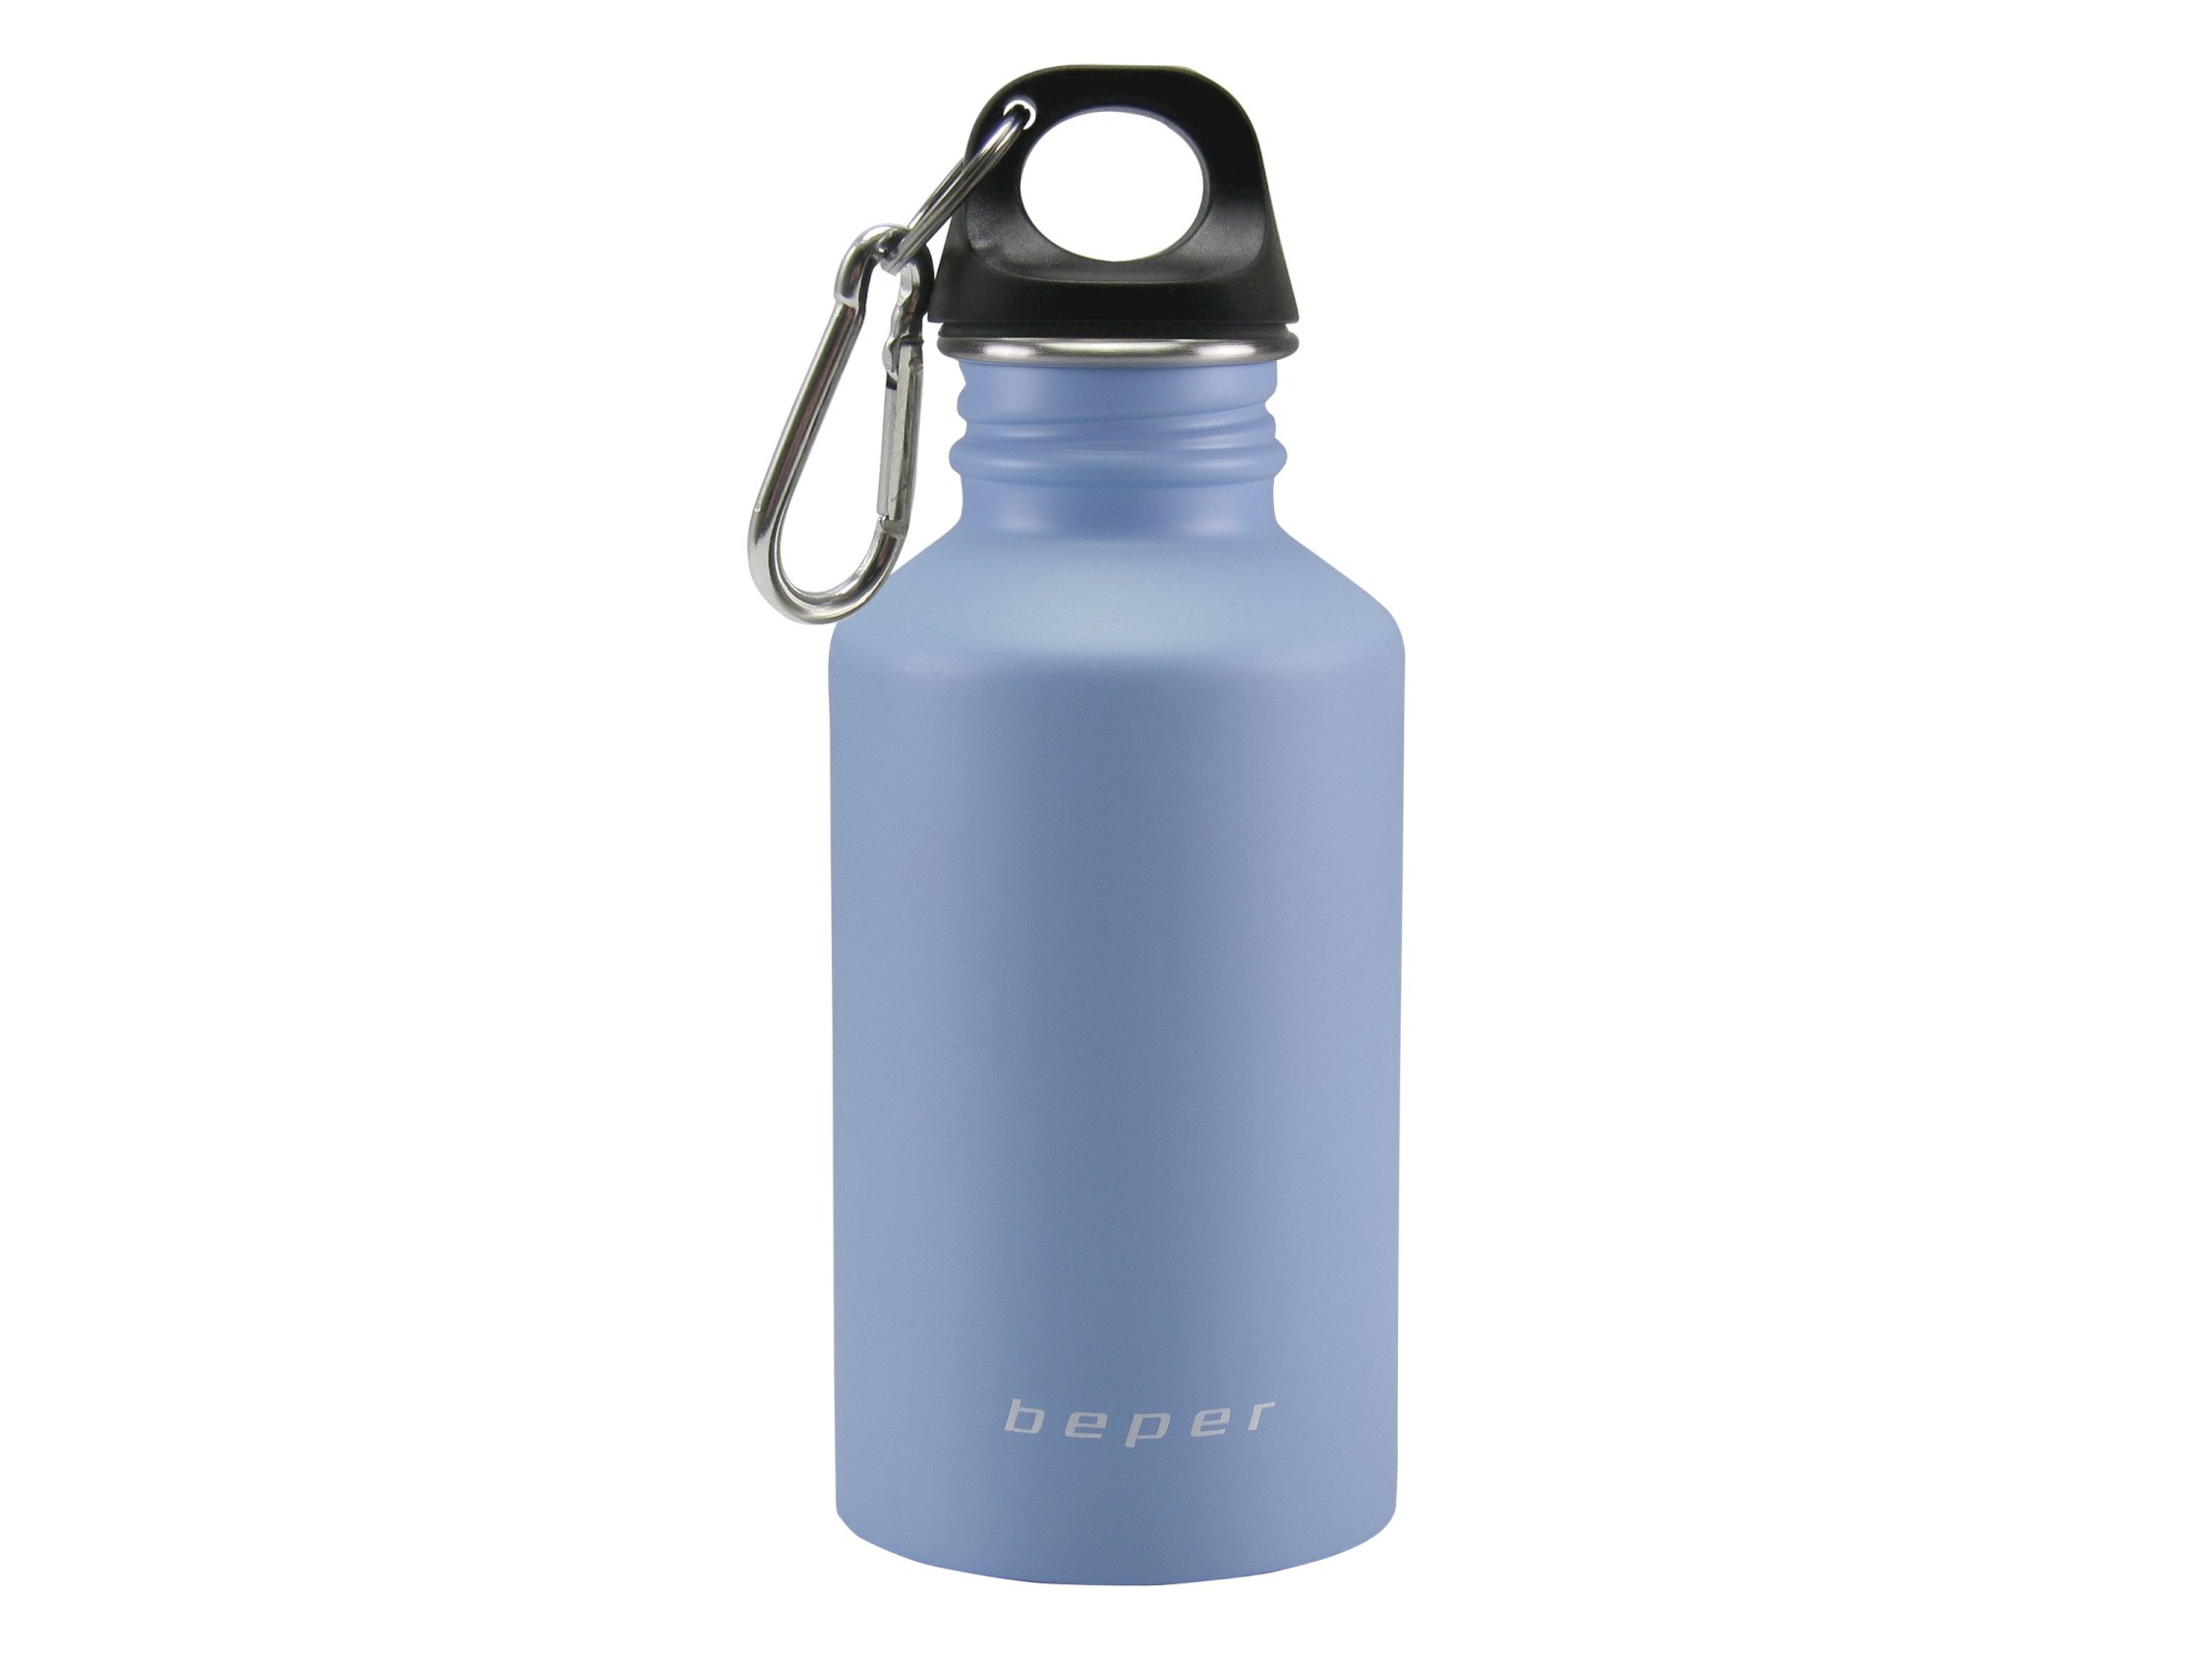 C102BOT004, flask, 500ml, stainless steel, blue